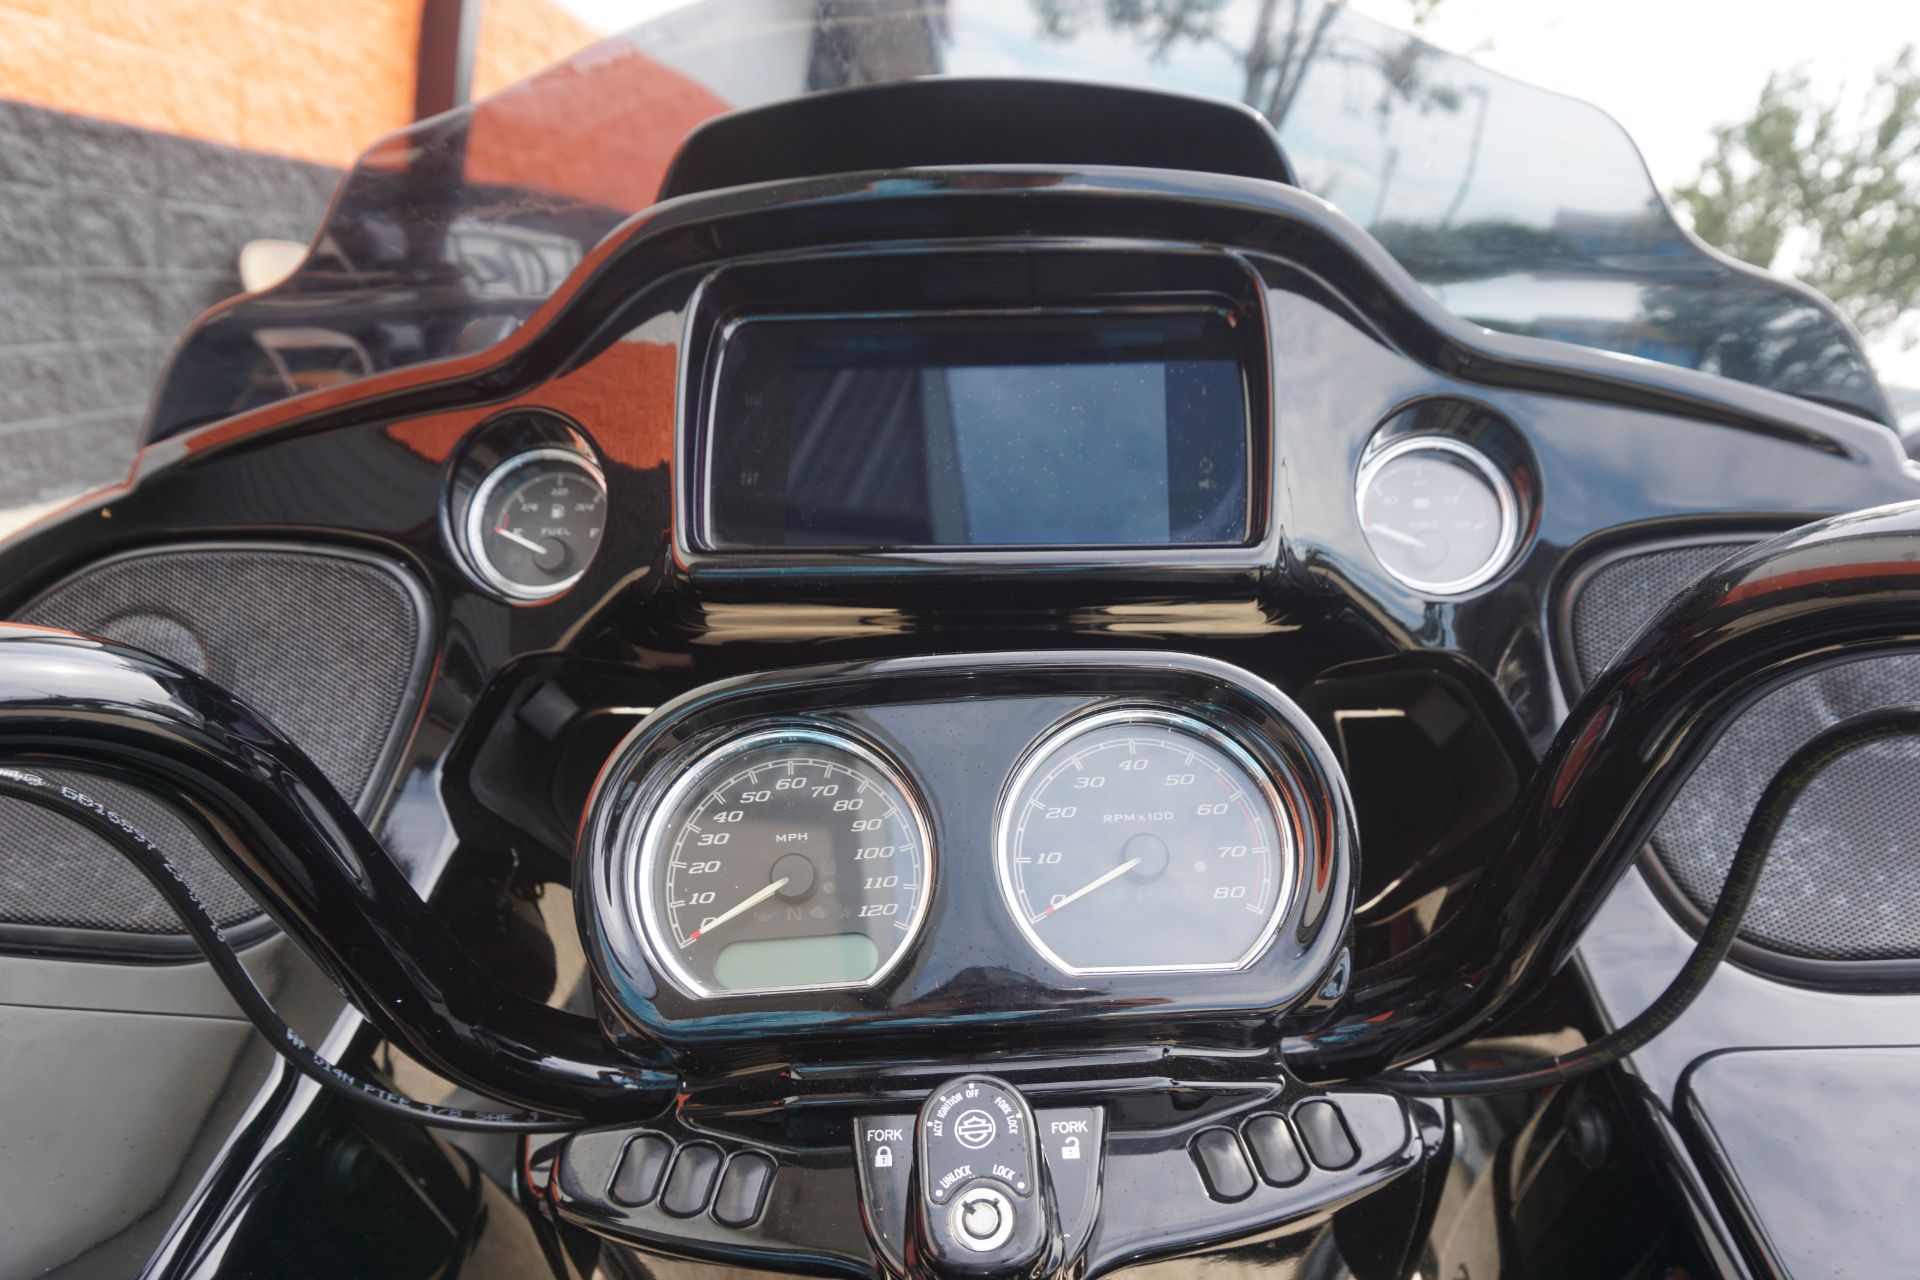 2019 Harley-Davidson Road Glide® Special in Metairie, Louisiana - Photo 13